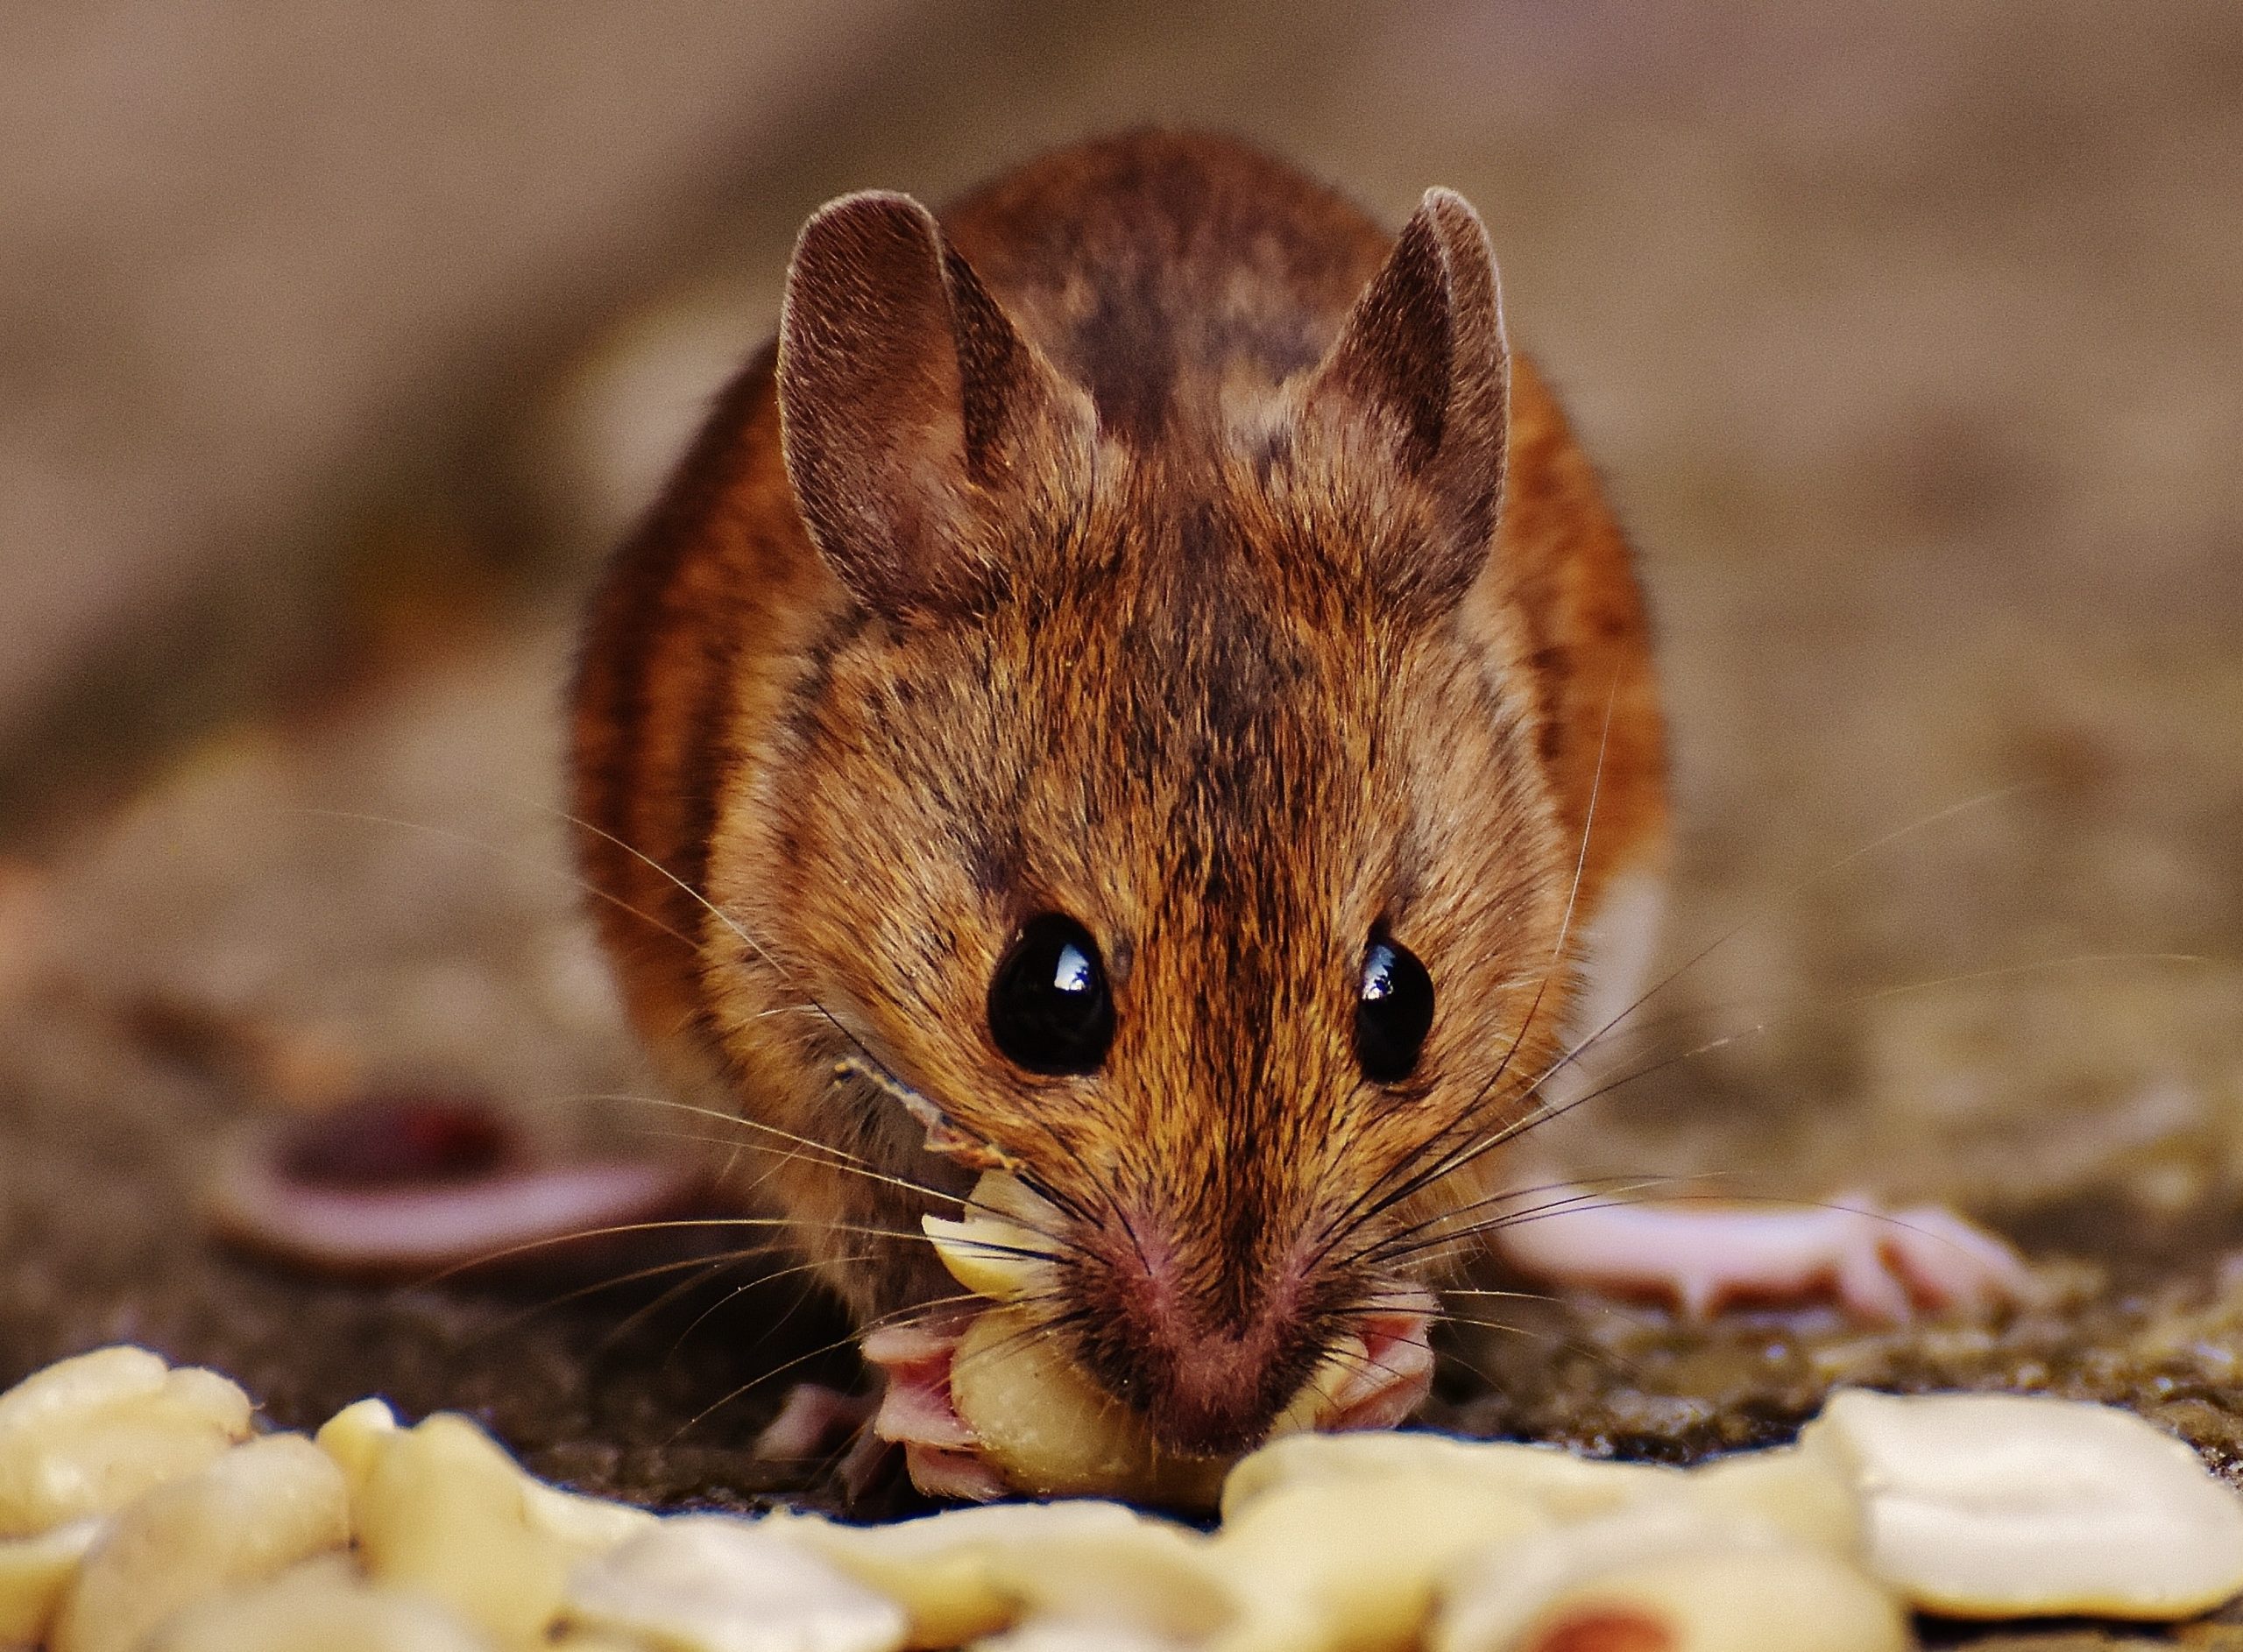 Mice bring in diseases by contaminating food in homes.